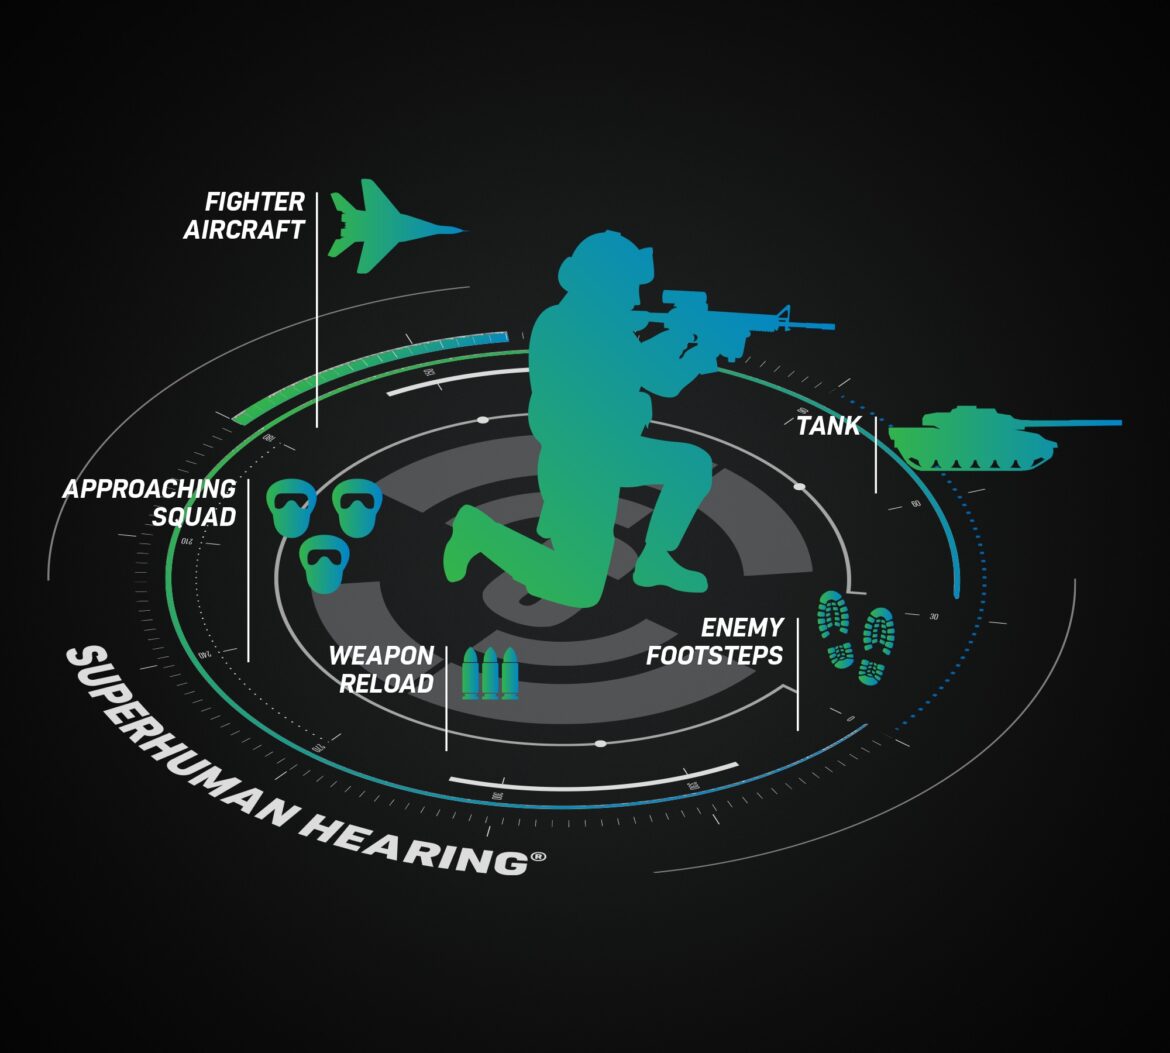 Turtle Beach’s Exclusive, patented superhuman hearing audio setting proven to improve gaming performance